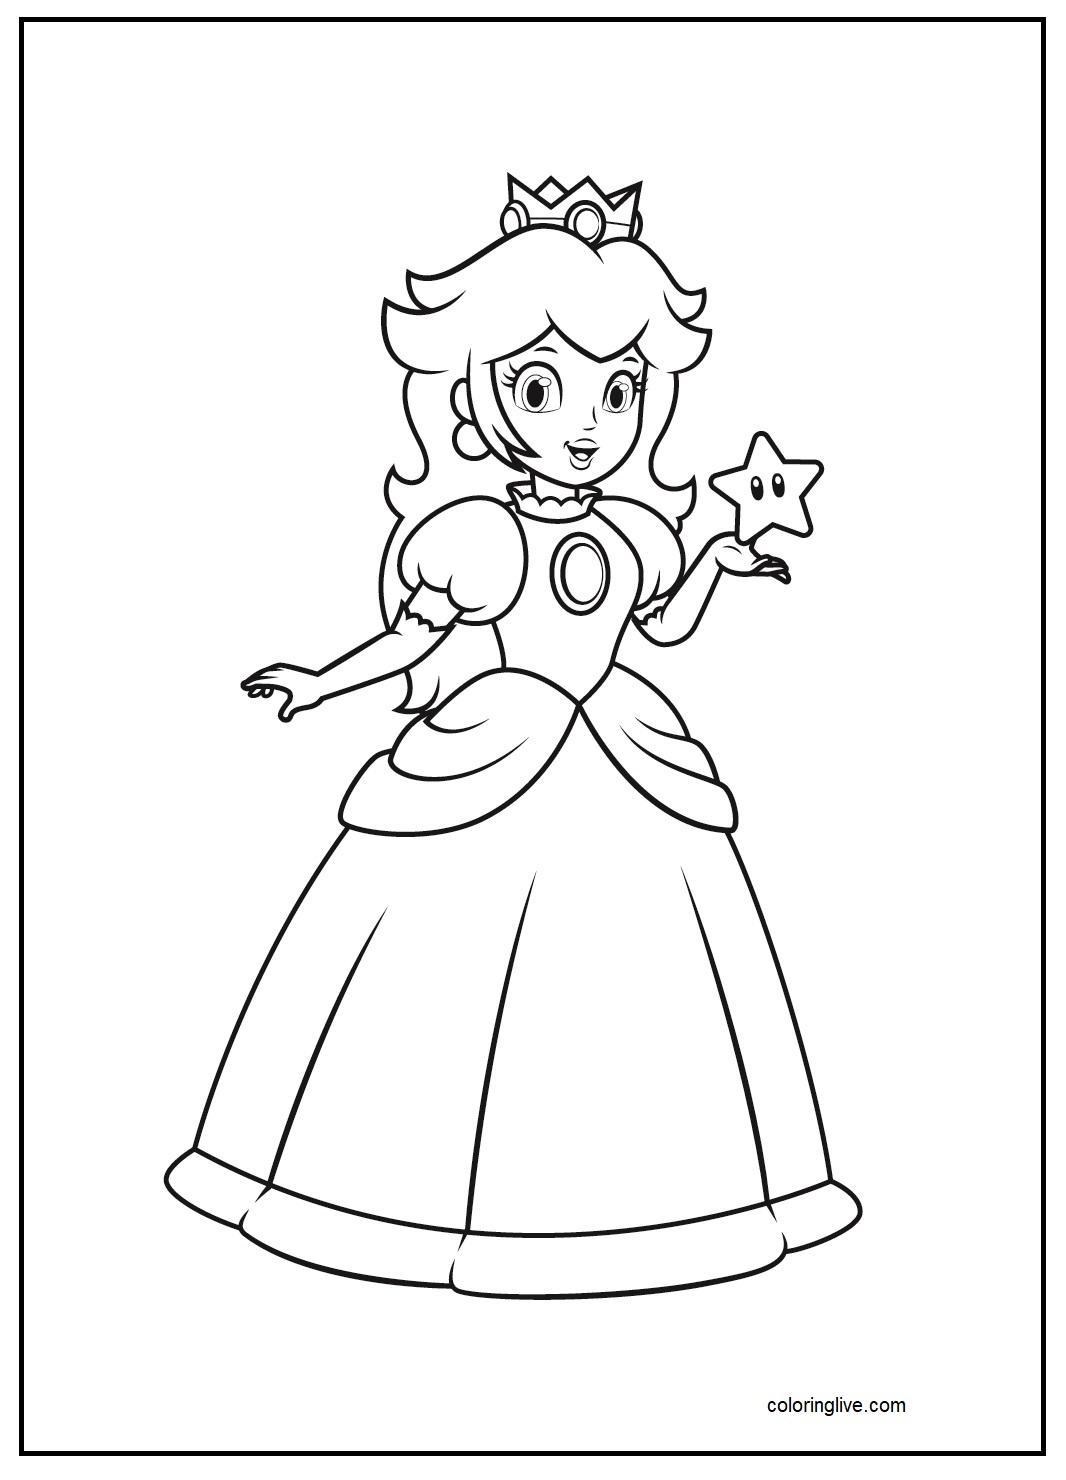 Printable Princess Peach holding a star Coloring Page for kids.